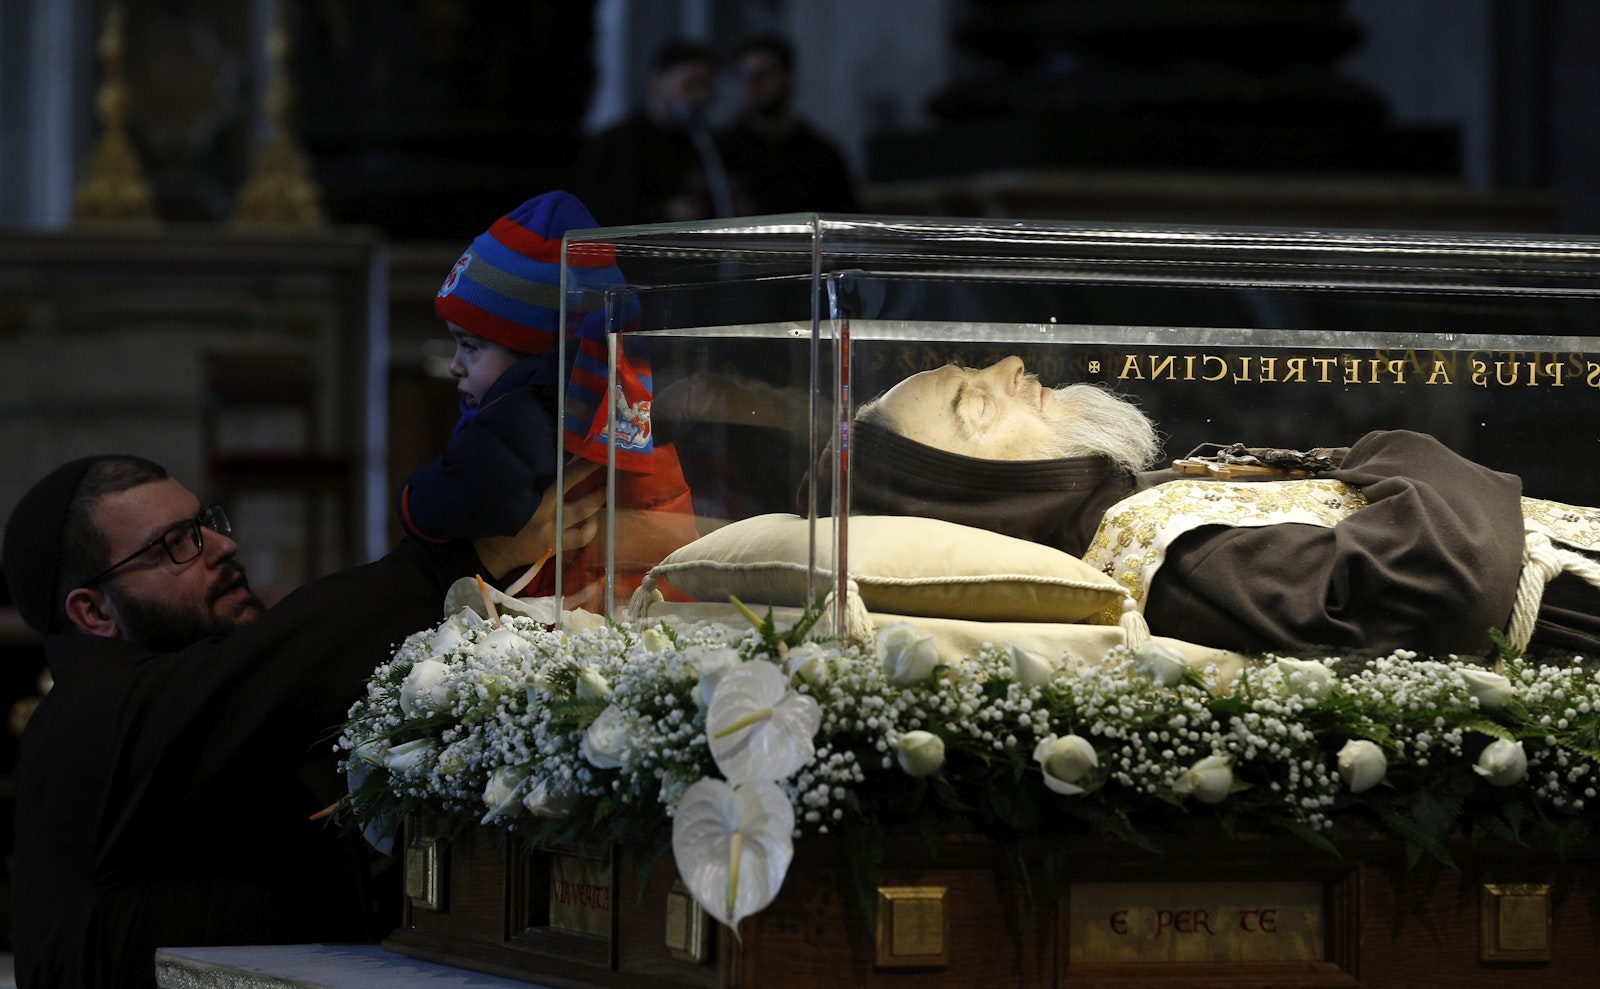 A child is lifted to come into contact with the glass case containing the body of St. Padre Pio in St. Peter's Basilica at the Vatican Feb. 6. The bodies of St. Padre Pio and St. Leopold Mandic were brought to Rome at the request of Pope Francis for the Year of Mercy. (CNS photo/Paul Haring)